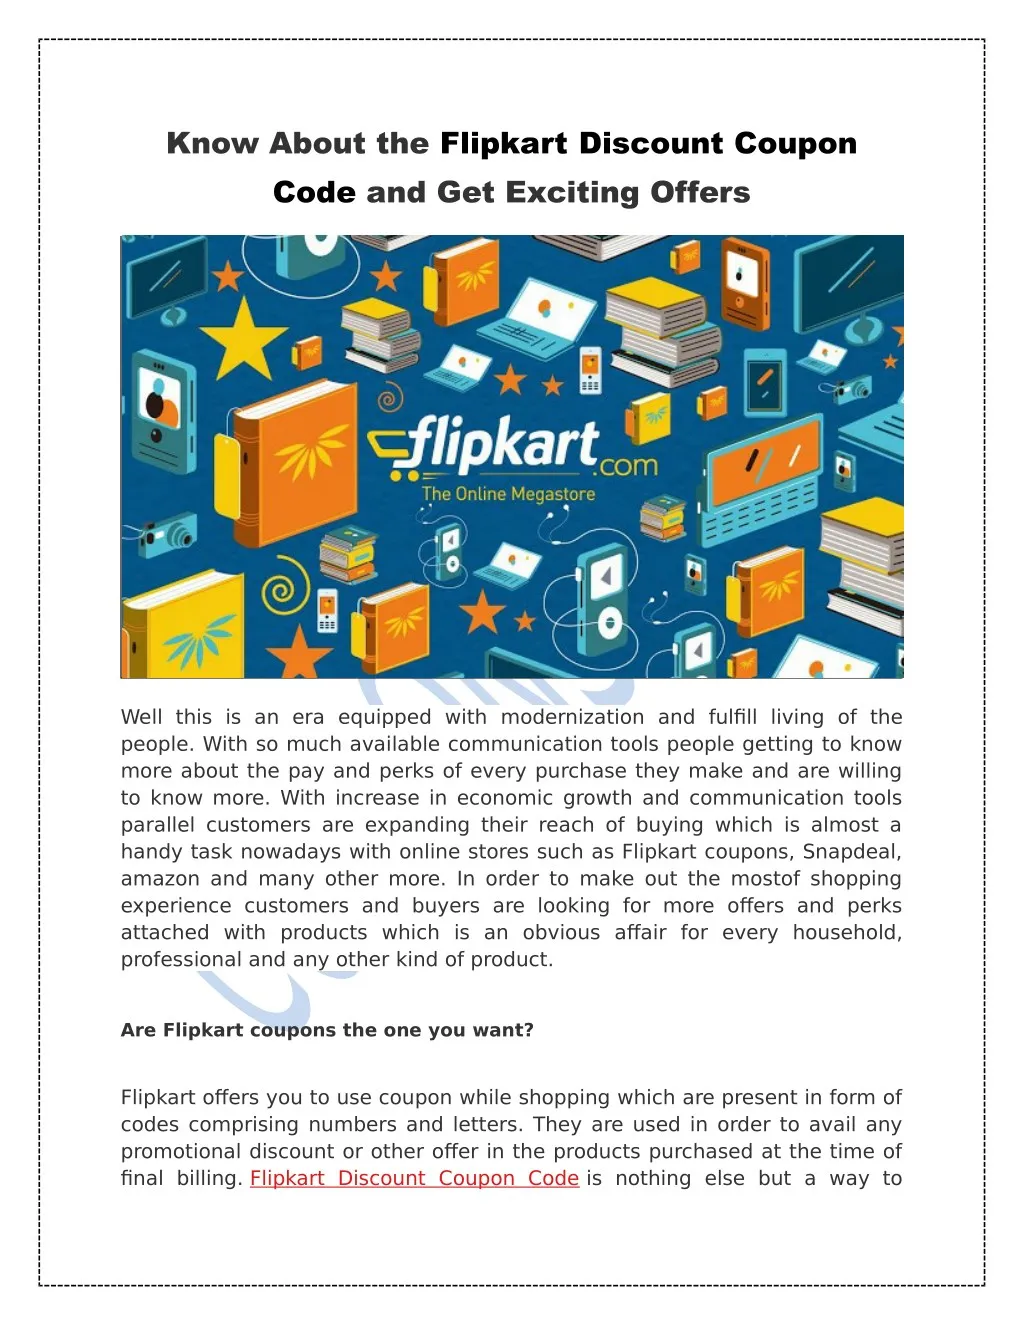 know about the flipkart discount coupon code